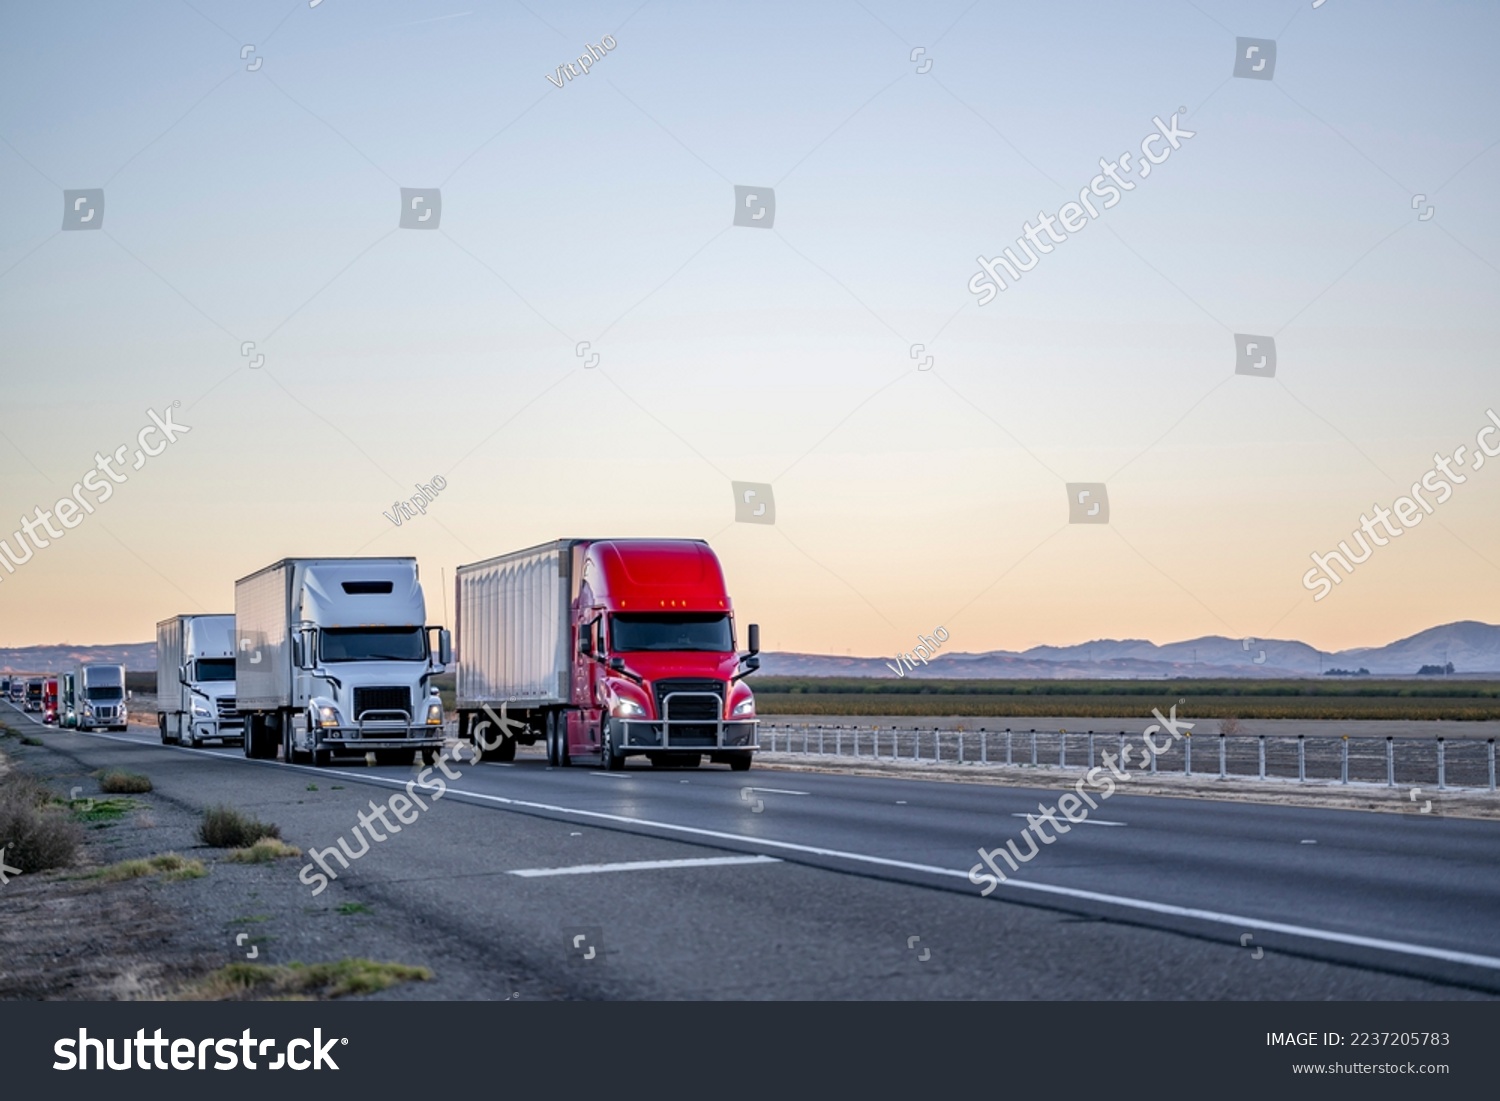 Convoy of a industrial grade commercial professional transportation of different big rig semi trucks with semi trailers driving on the straight highway road at twilight time in California #2237205783